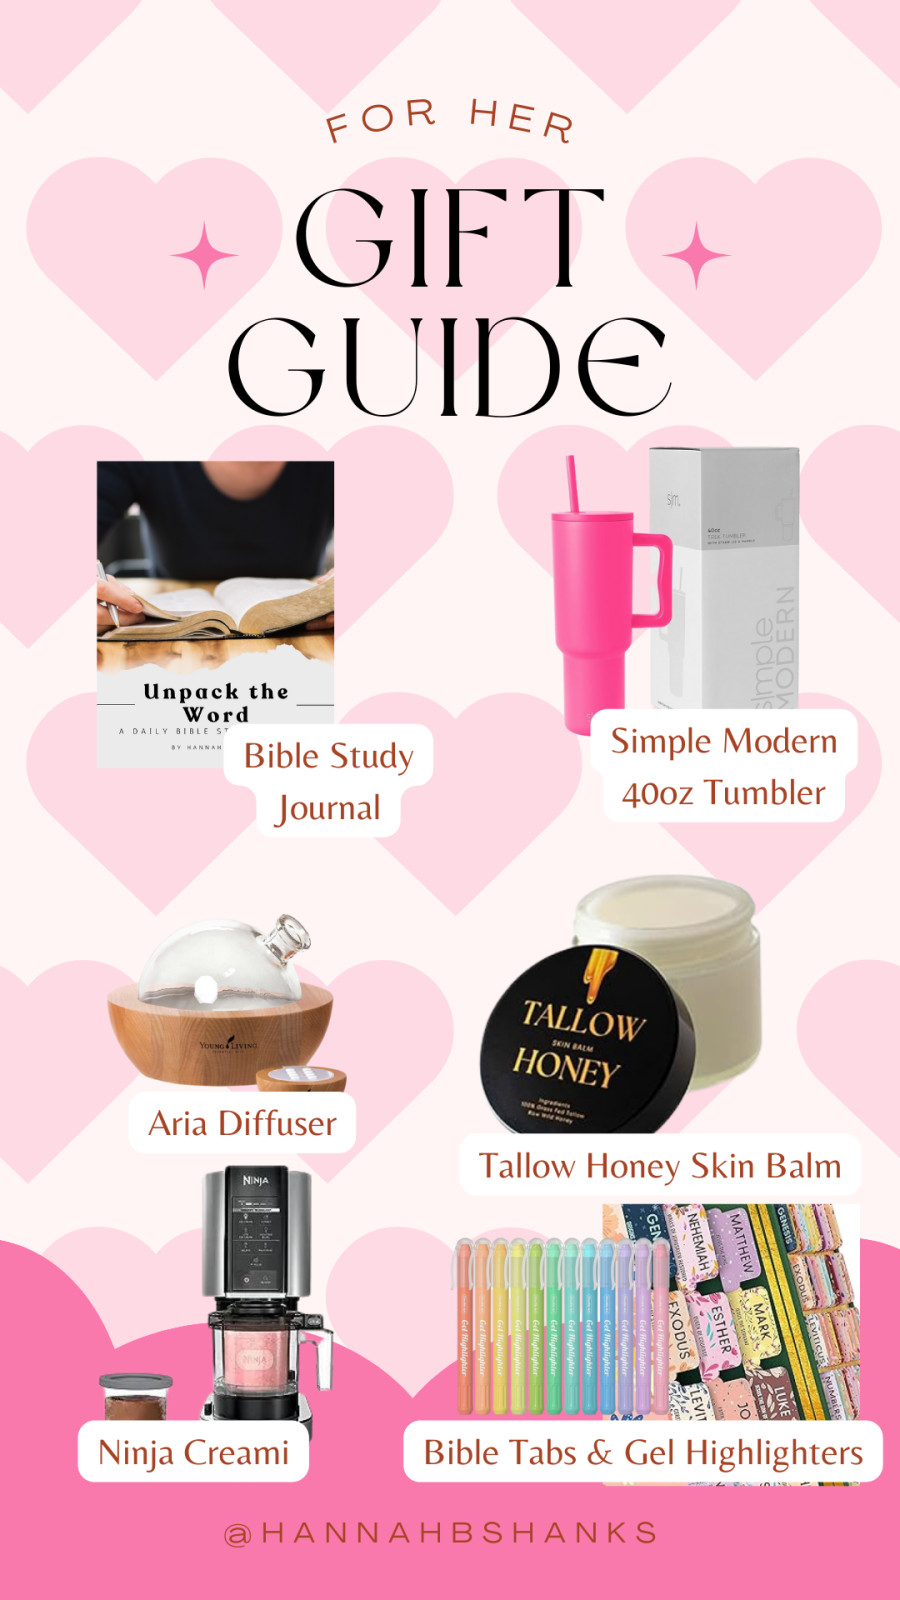 Holiday Gift Guide for Her: The Ultimate List for the Jesus-Loving, Low-Tox Mama!